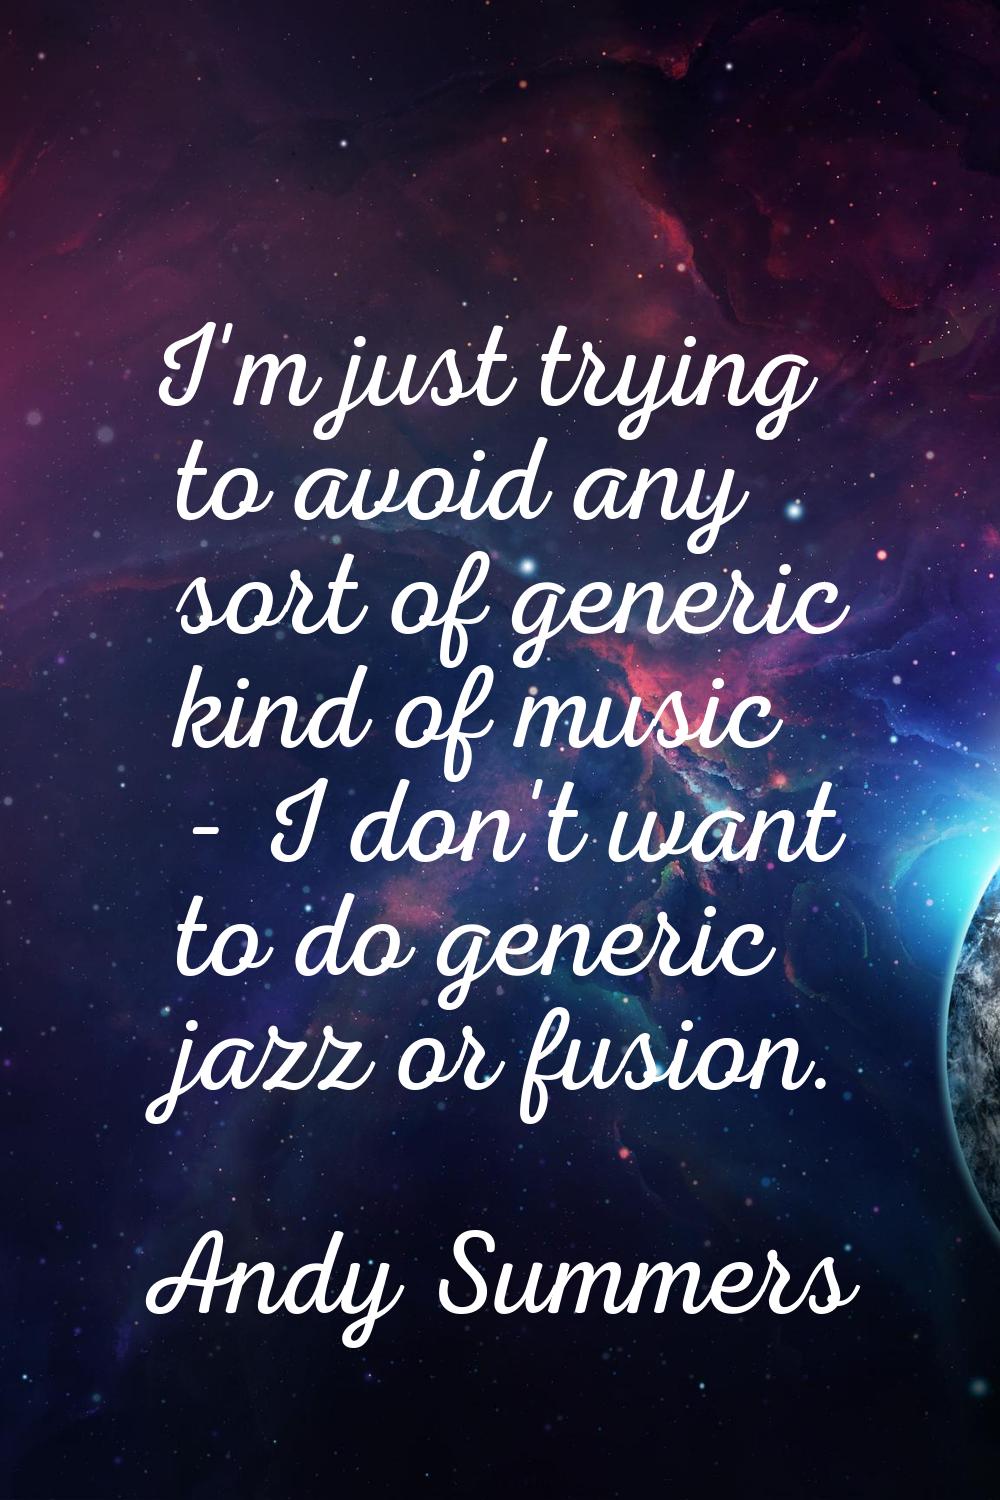 I'm just trying to avoid any sort of generic kind of music - I don't want to do generic jazz or fus